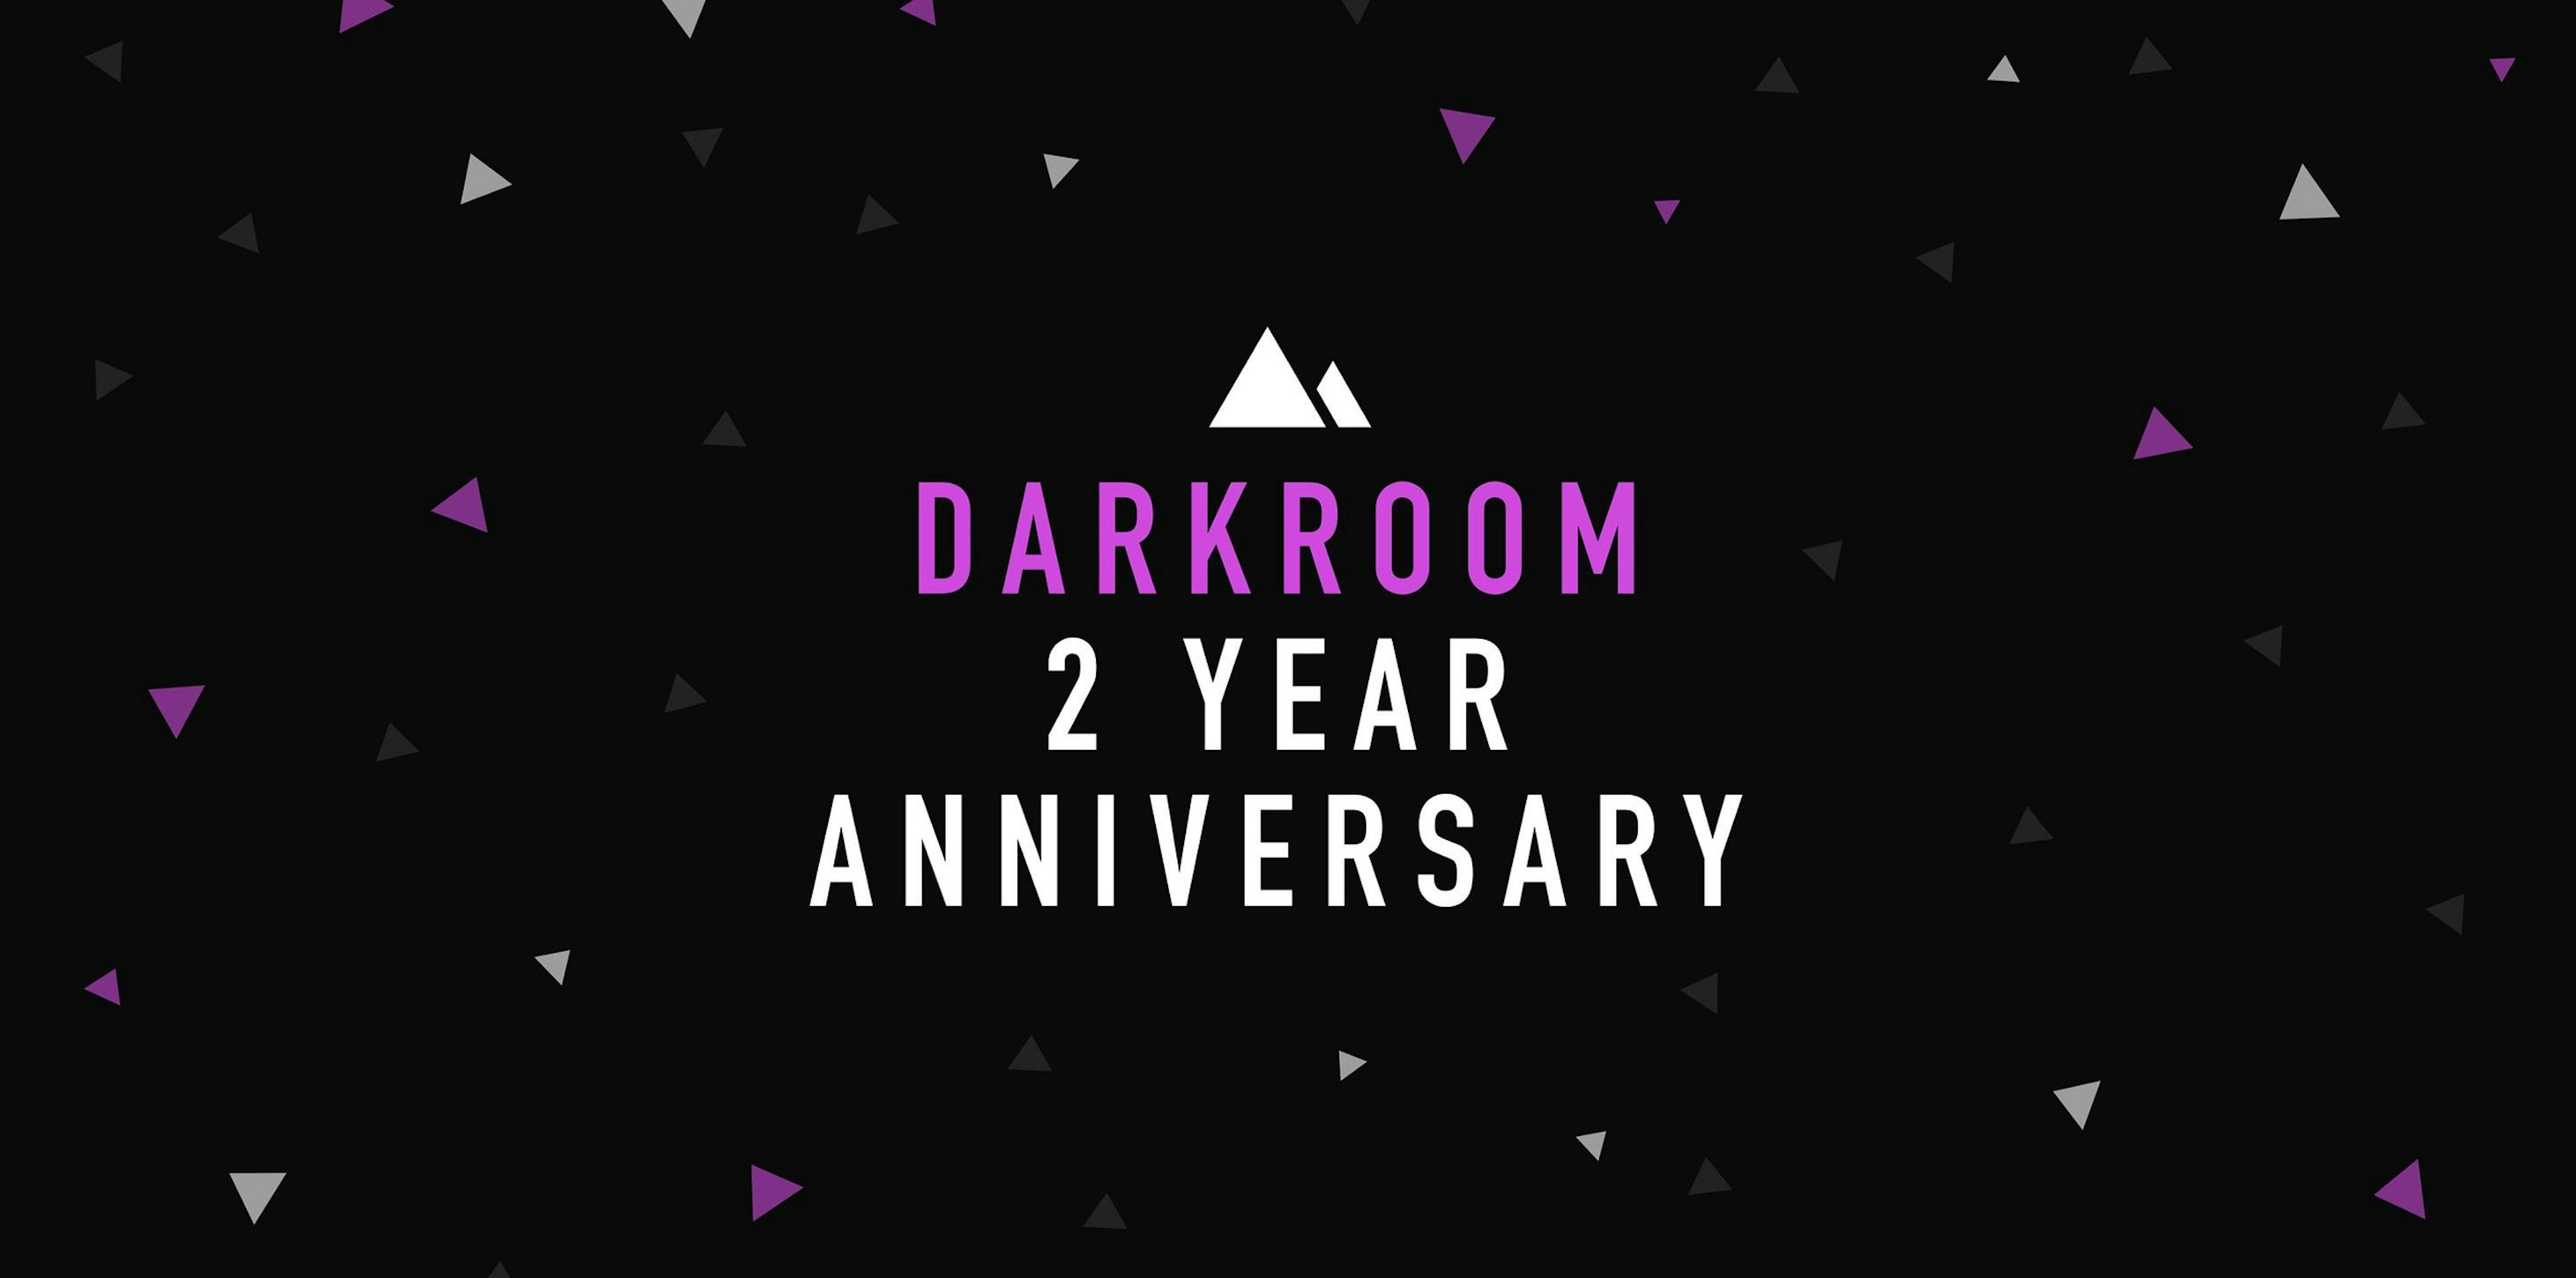 Cover Image for Darkroom’s 2 Year Anniversary Celebration